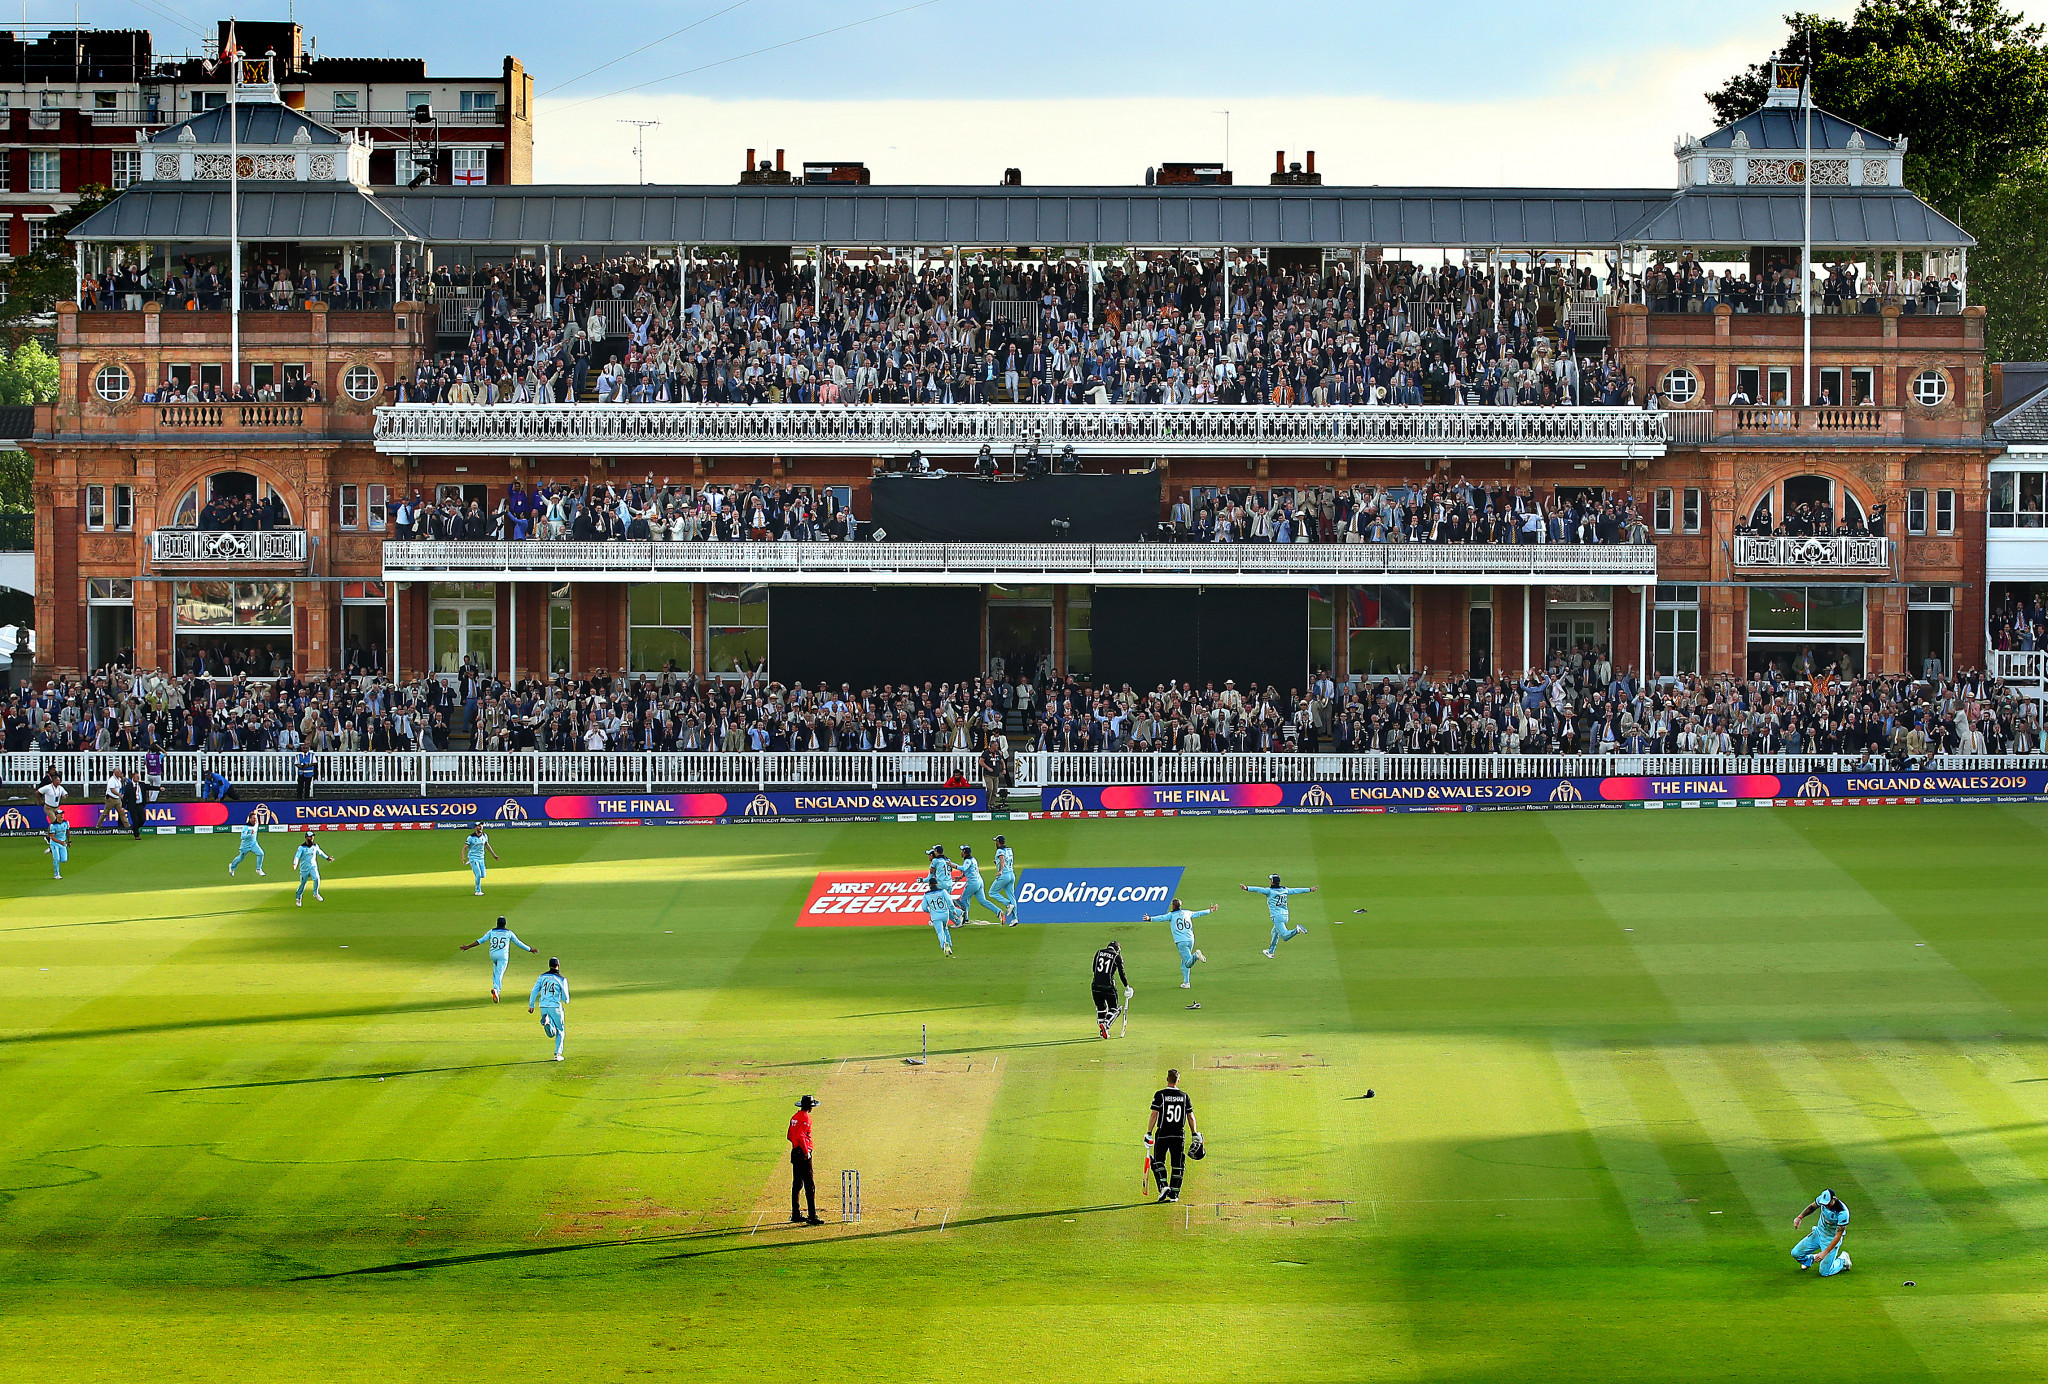 England beat New Zealand in the super over of the 2019 World Cup final at Lord's Cricket Ground ©Getty Images